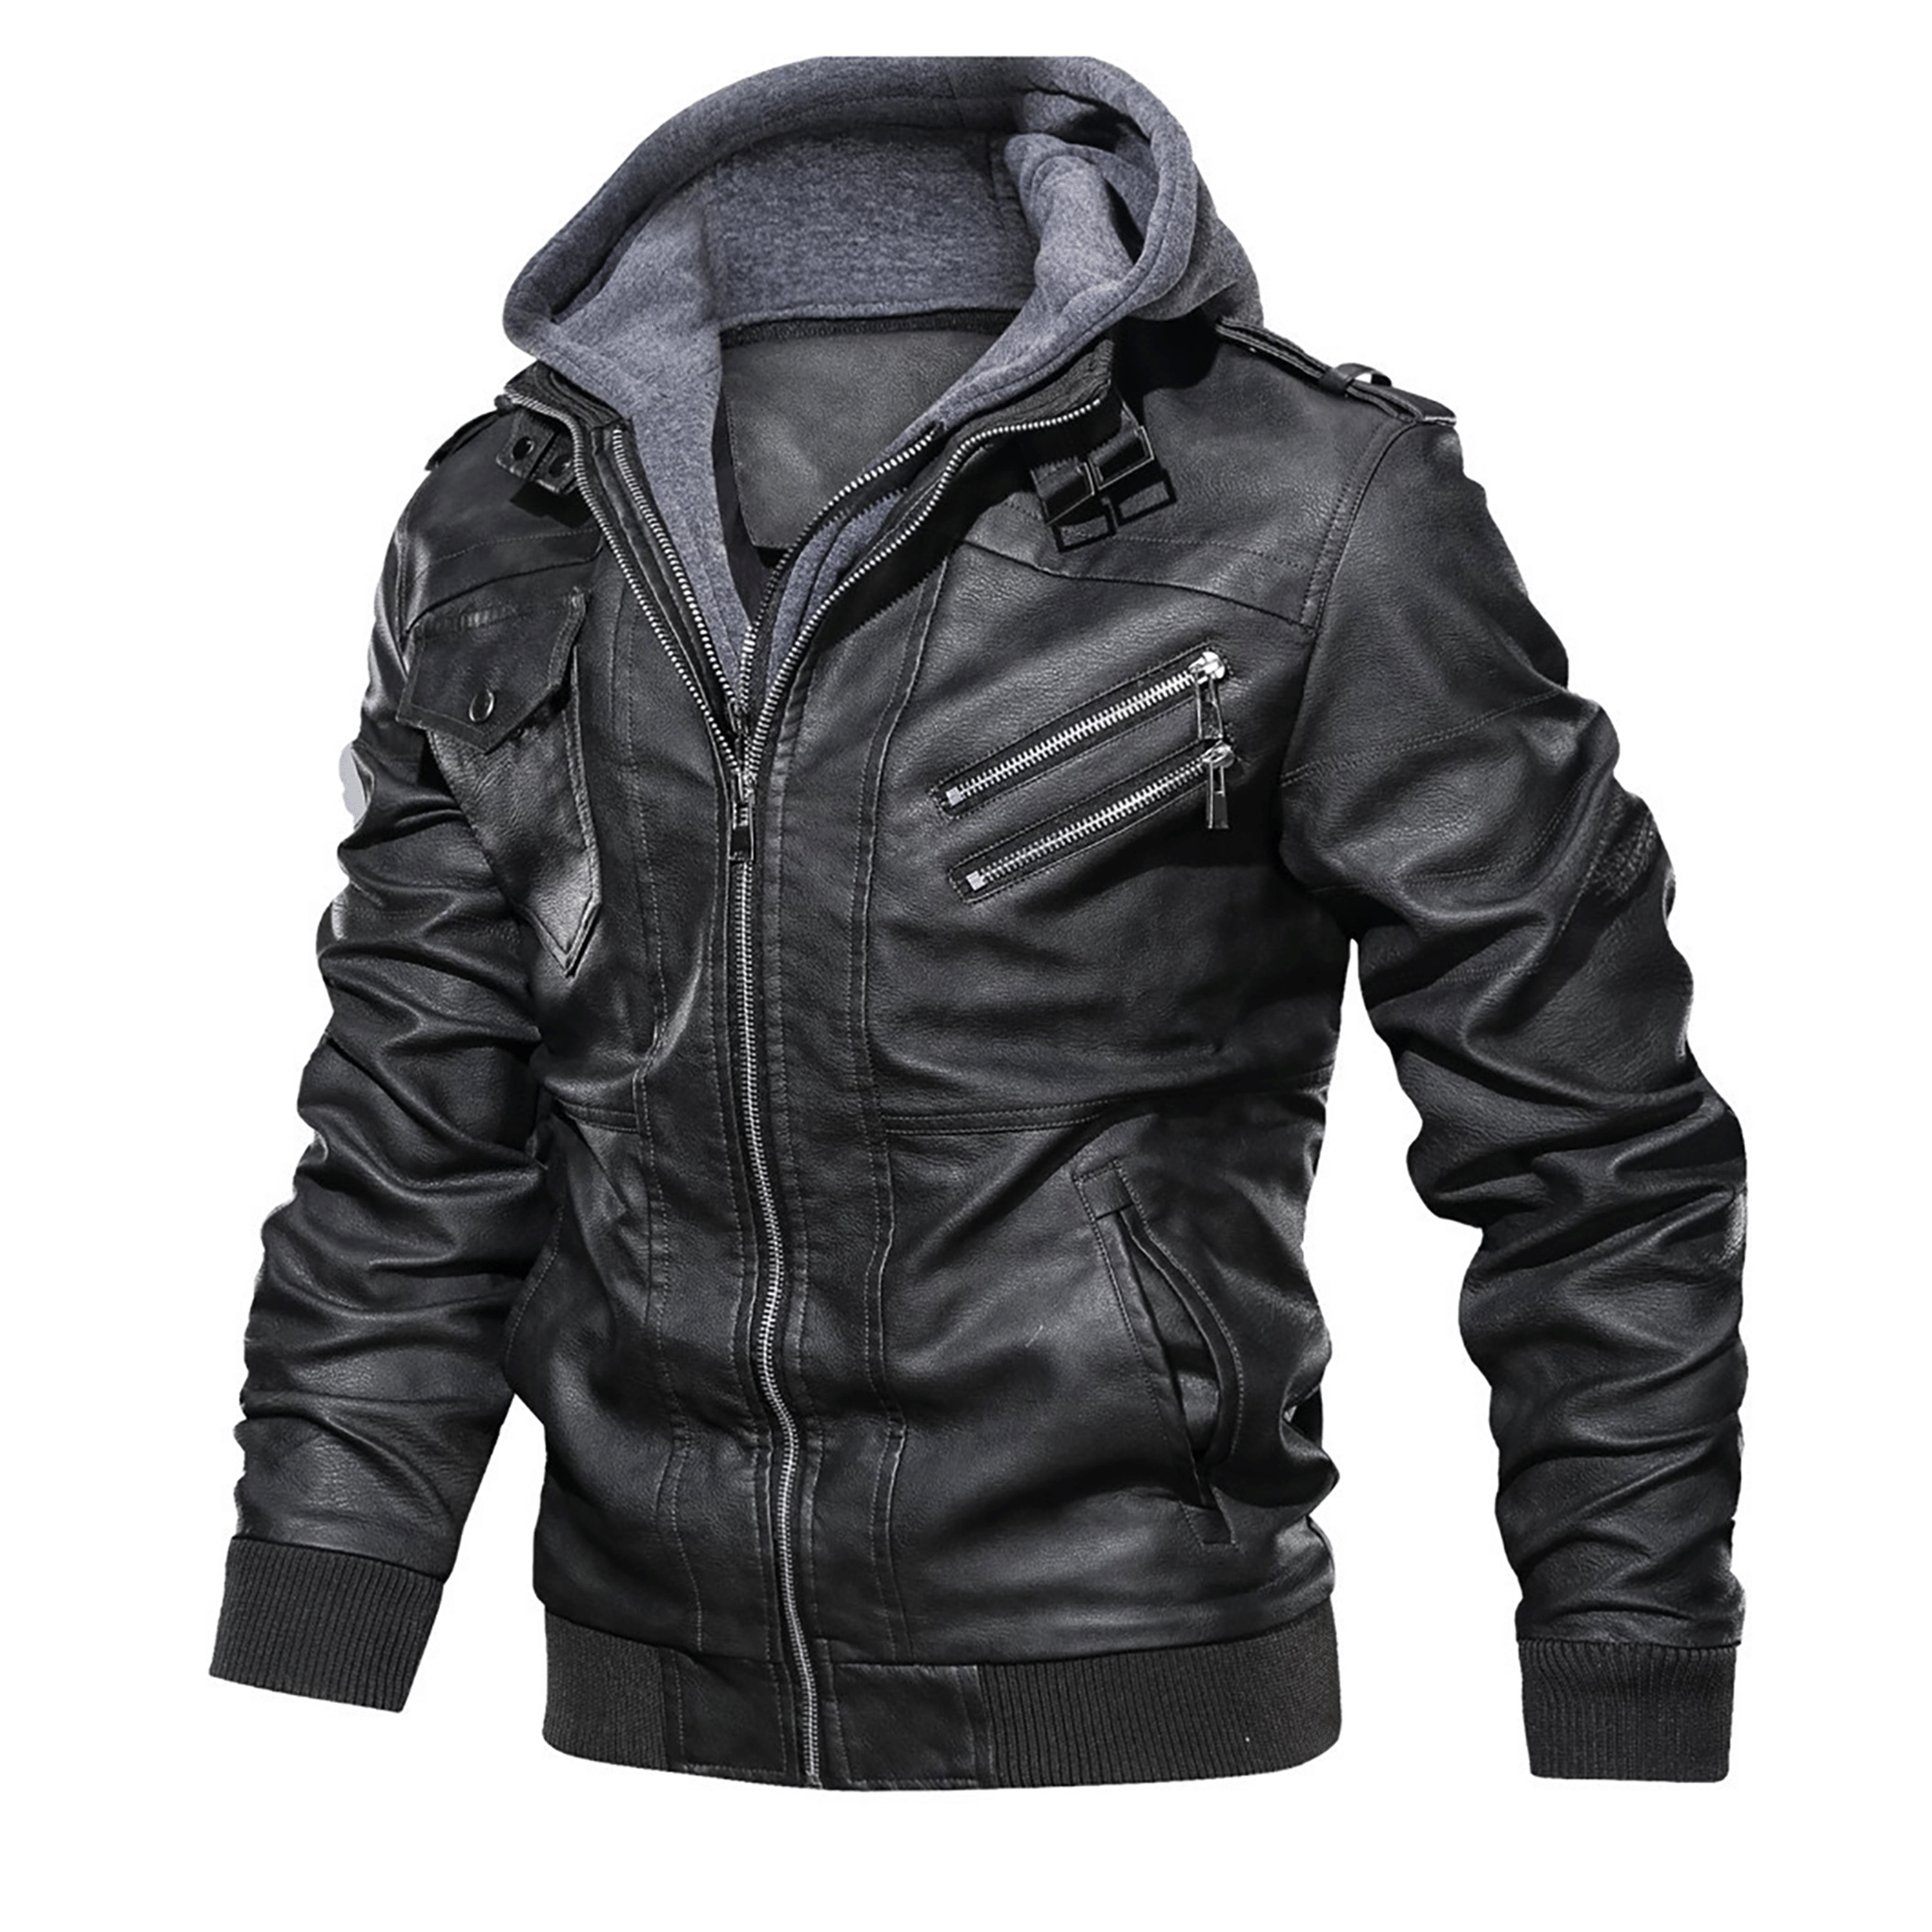 Top leather jackets and latest products 293